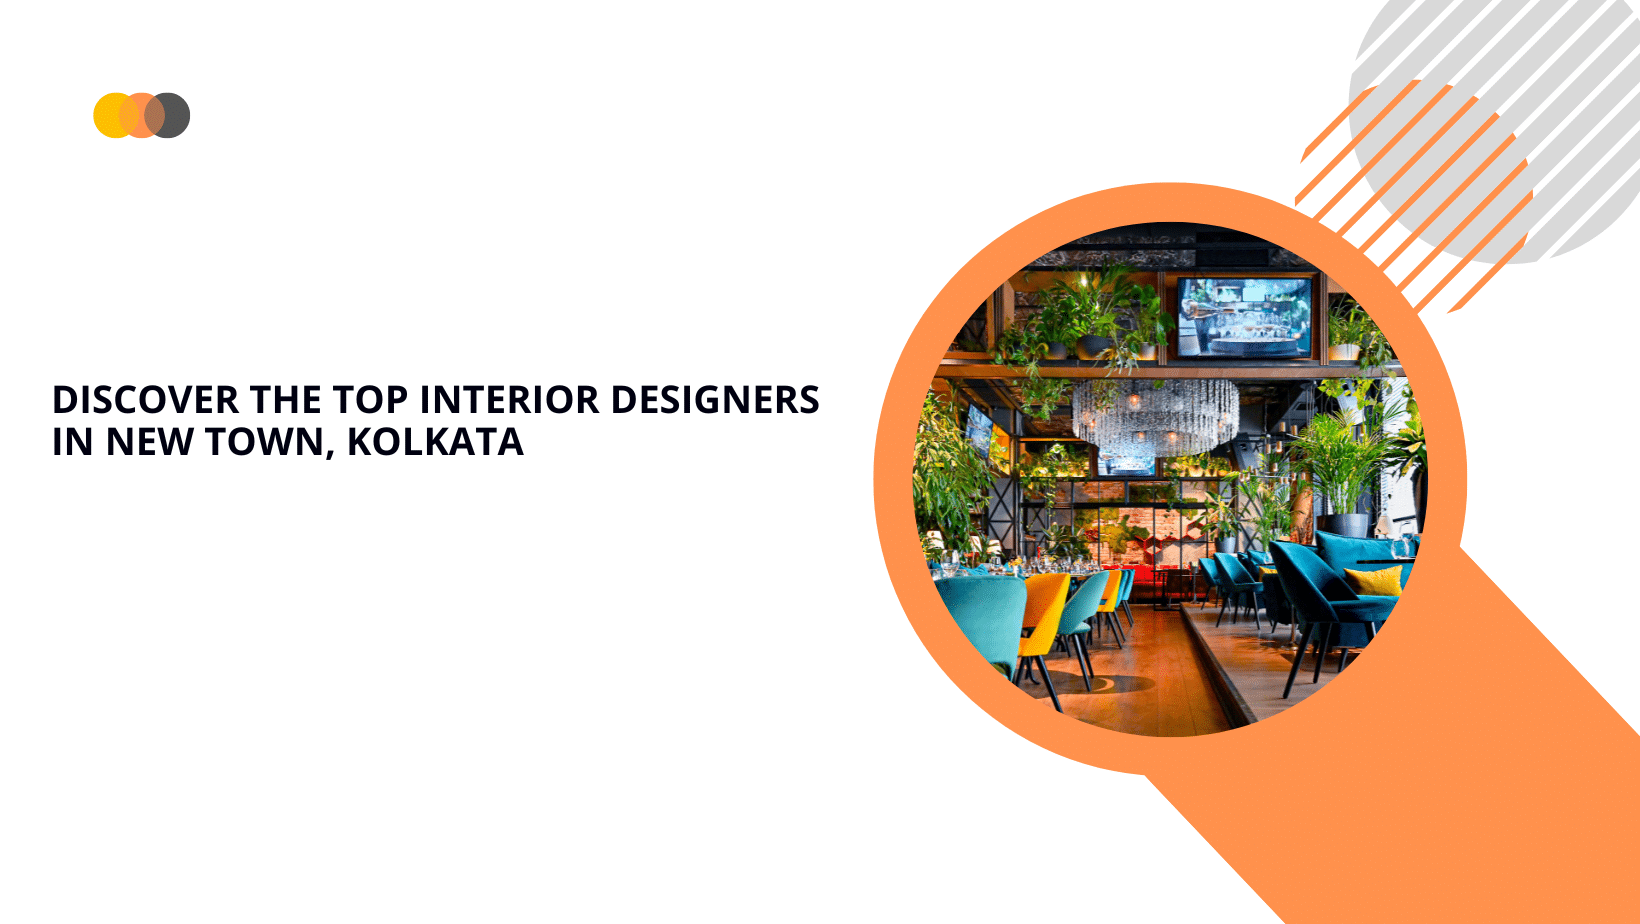 Discover the Top Interior Designers in New Town, Kolkata